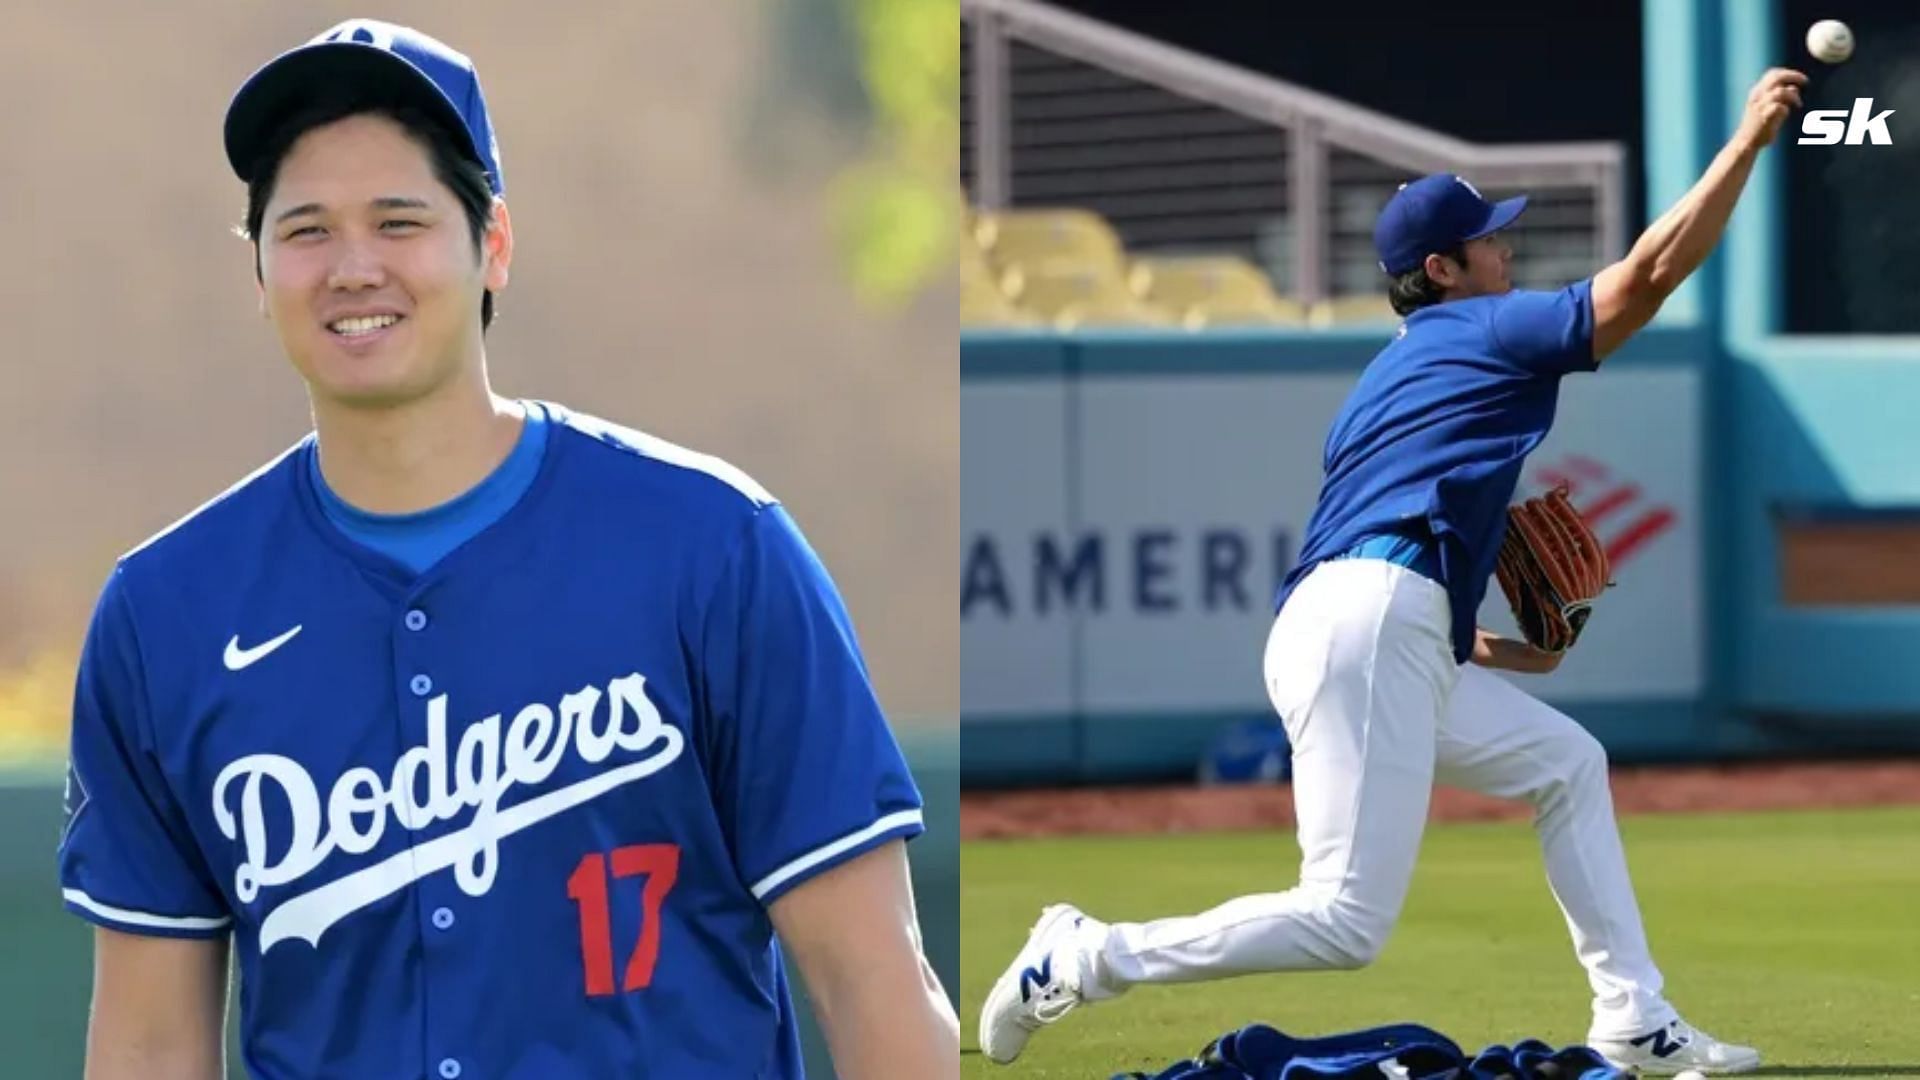 WATCH: Shohei Ohtani seen throwing at Oracle Park prior to Dodgers matchup against Giants